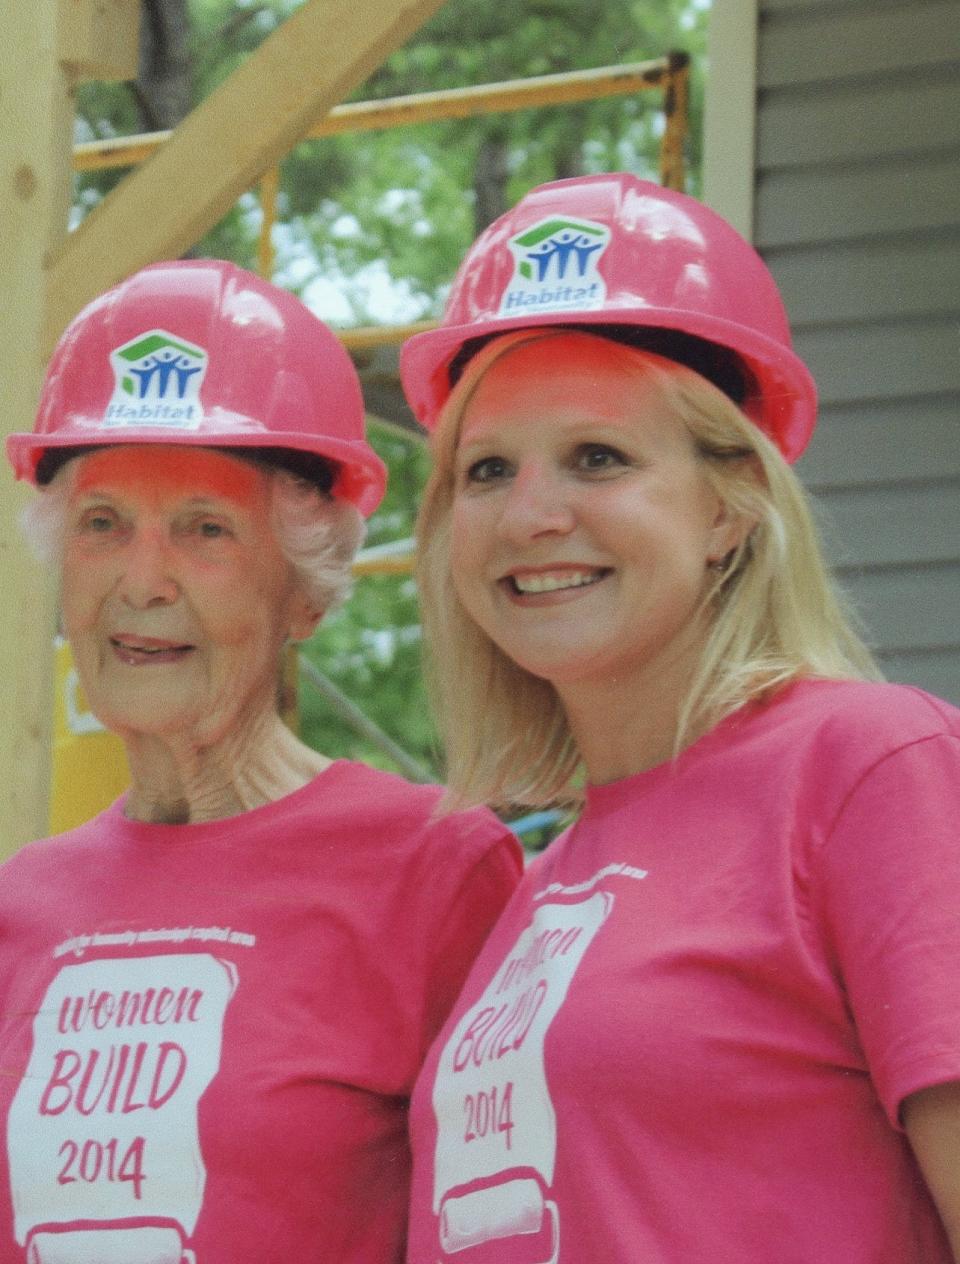 The 2022 Women Build home is being built in memory of former Mississippi First Lady and Habitat founder Elise Winter (left) who passed away on July 17, 2021. She is pictured here with Mississippi First Lady Elee Reeves from when the two volunteered together to build a Habitat home in 2014.